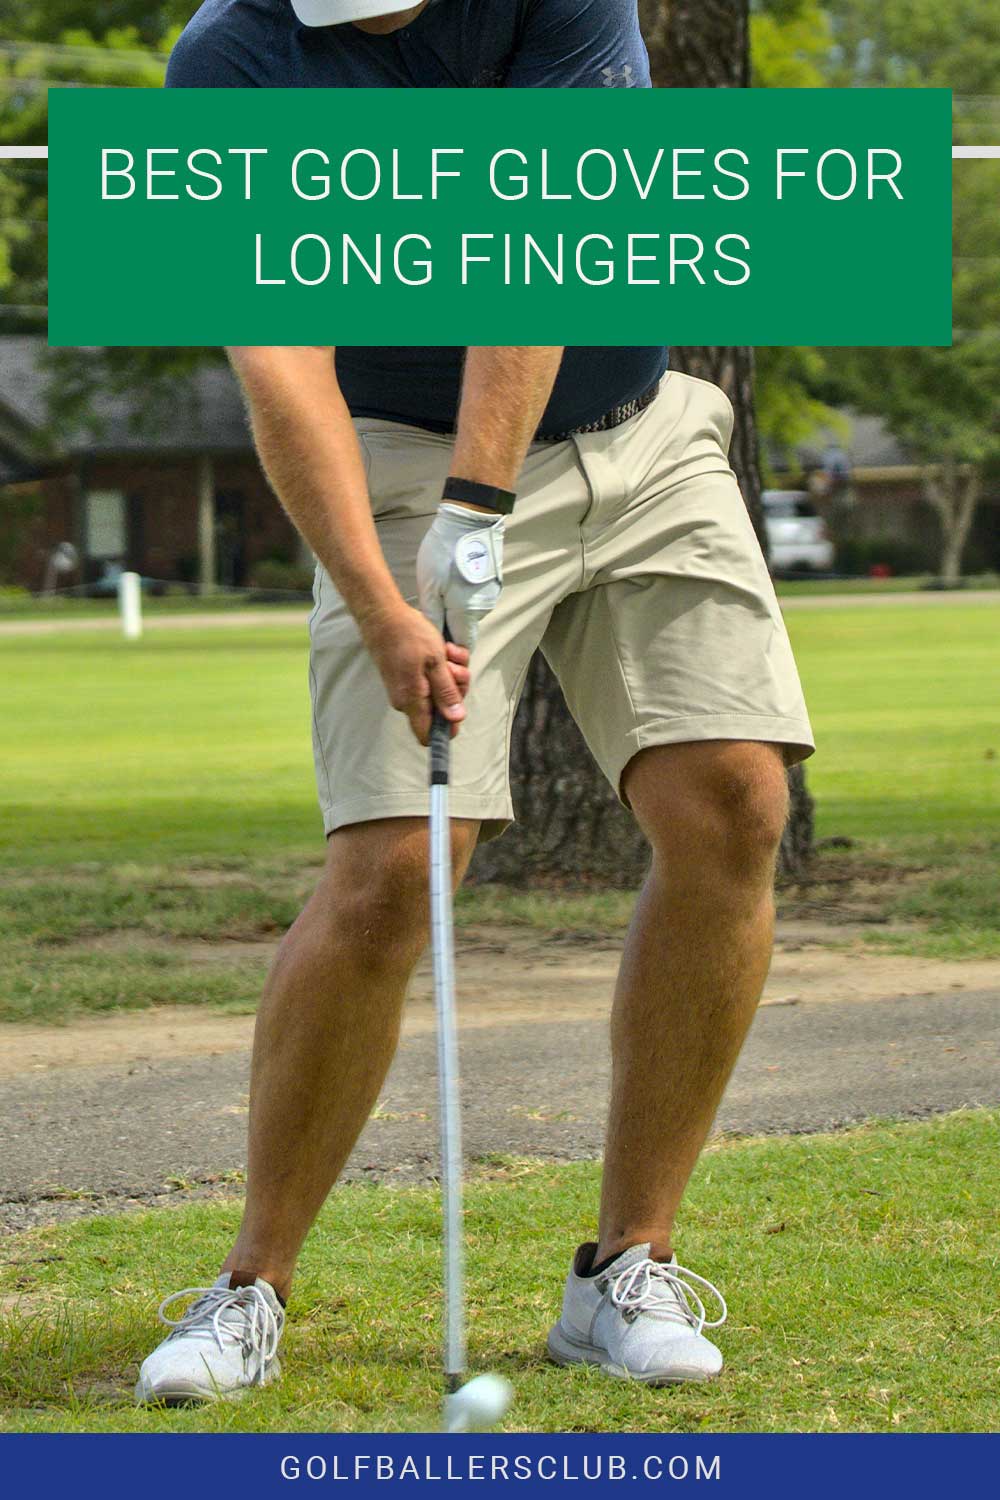 Man wearing white sneakers taking a shot on a golf course - Best Golf Gloves for Long Fingers.